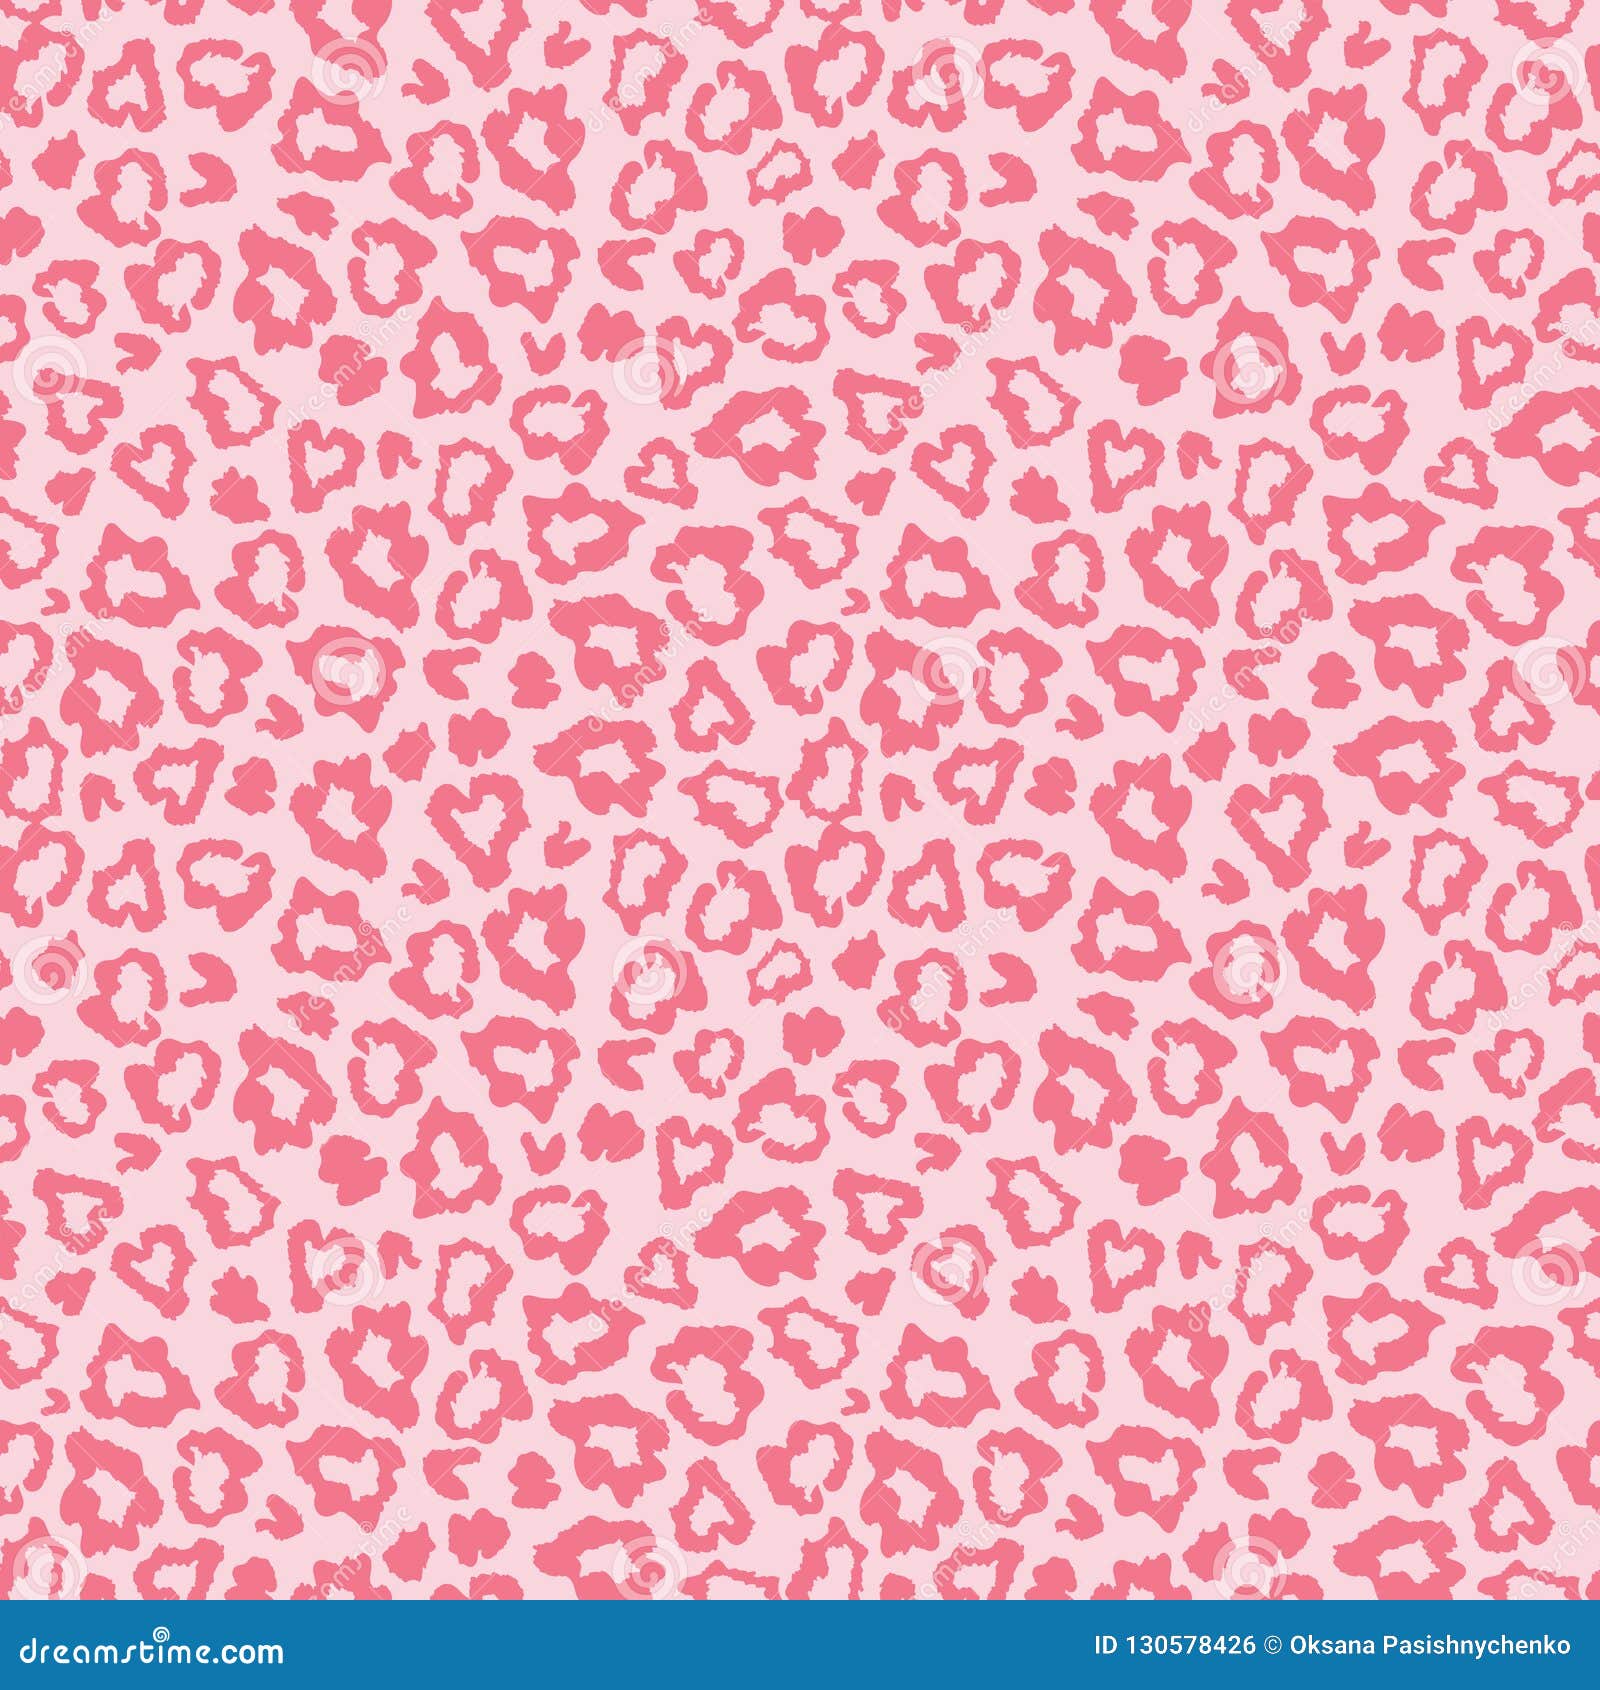 Get the coolest Background pink leopard print Images and videos for ...